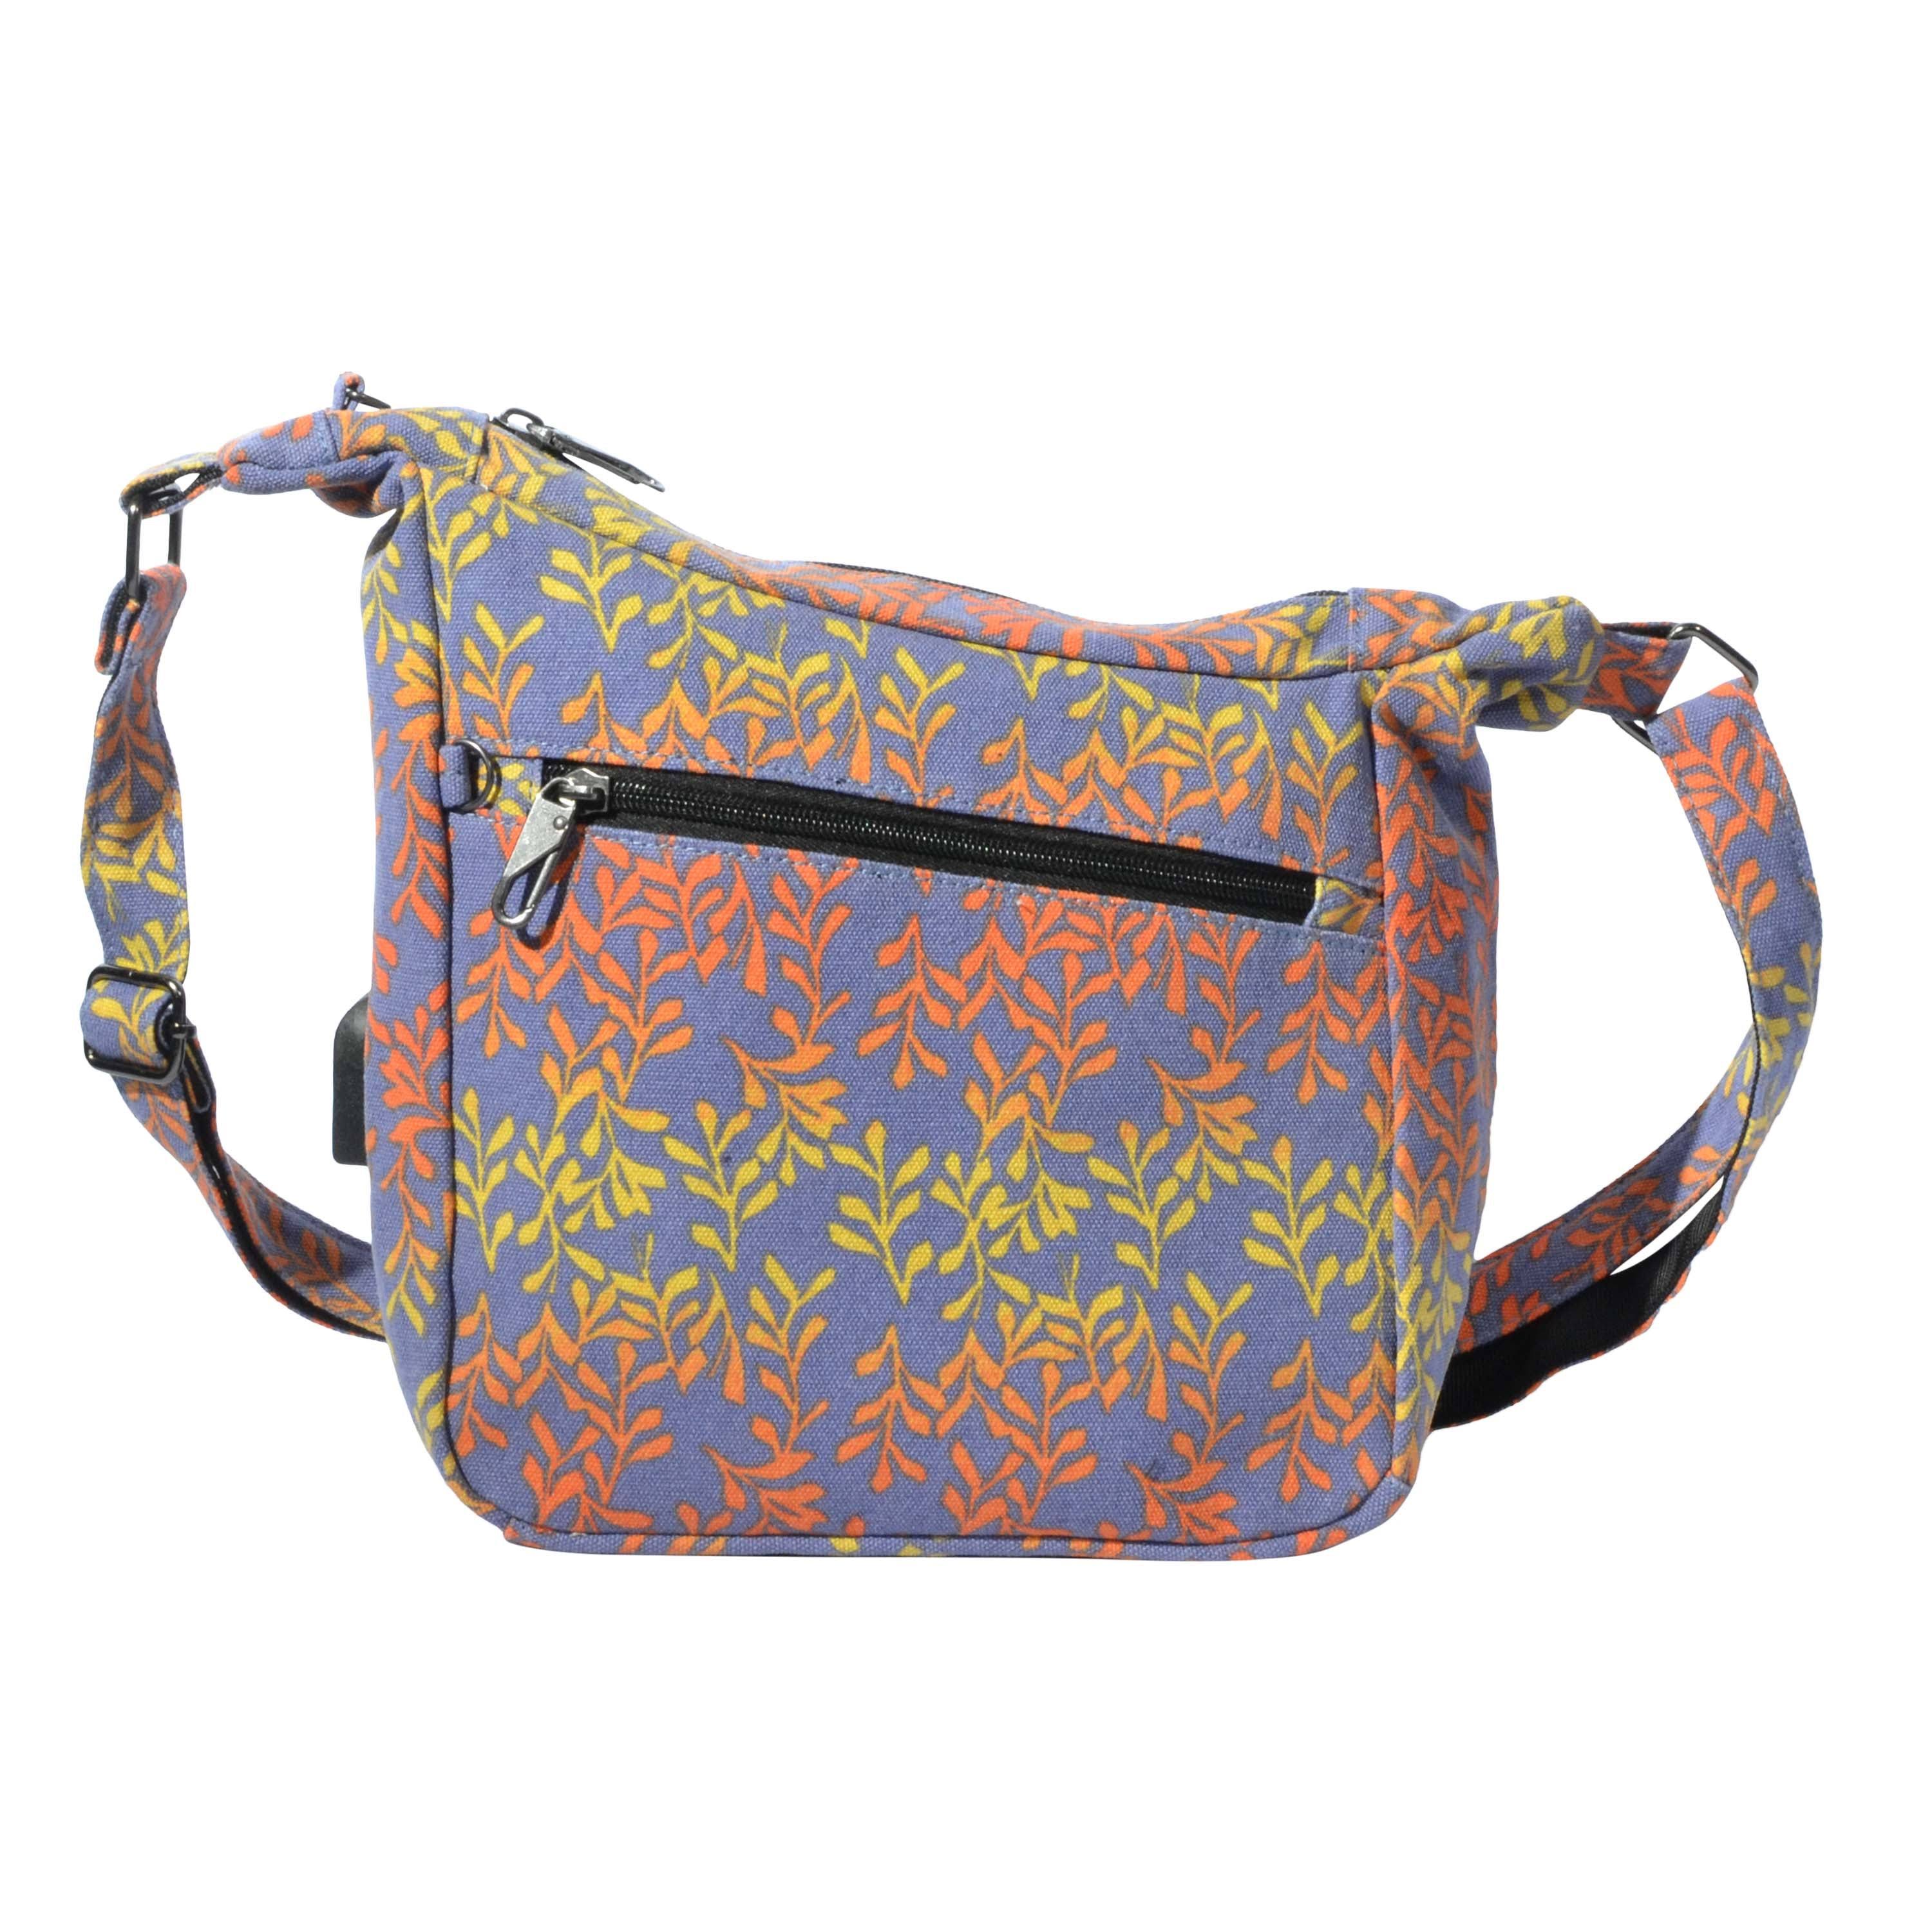 Nupouch Anti-Theft Crossbody Bag Navy Yellow Leaves